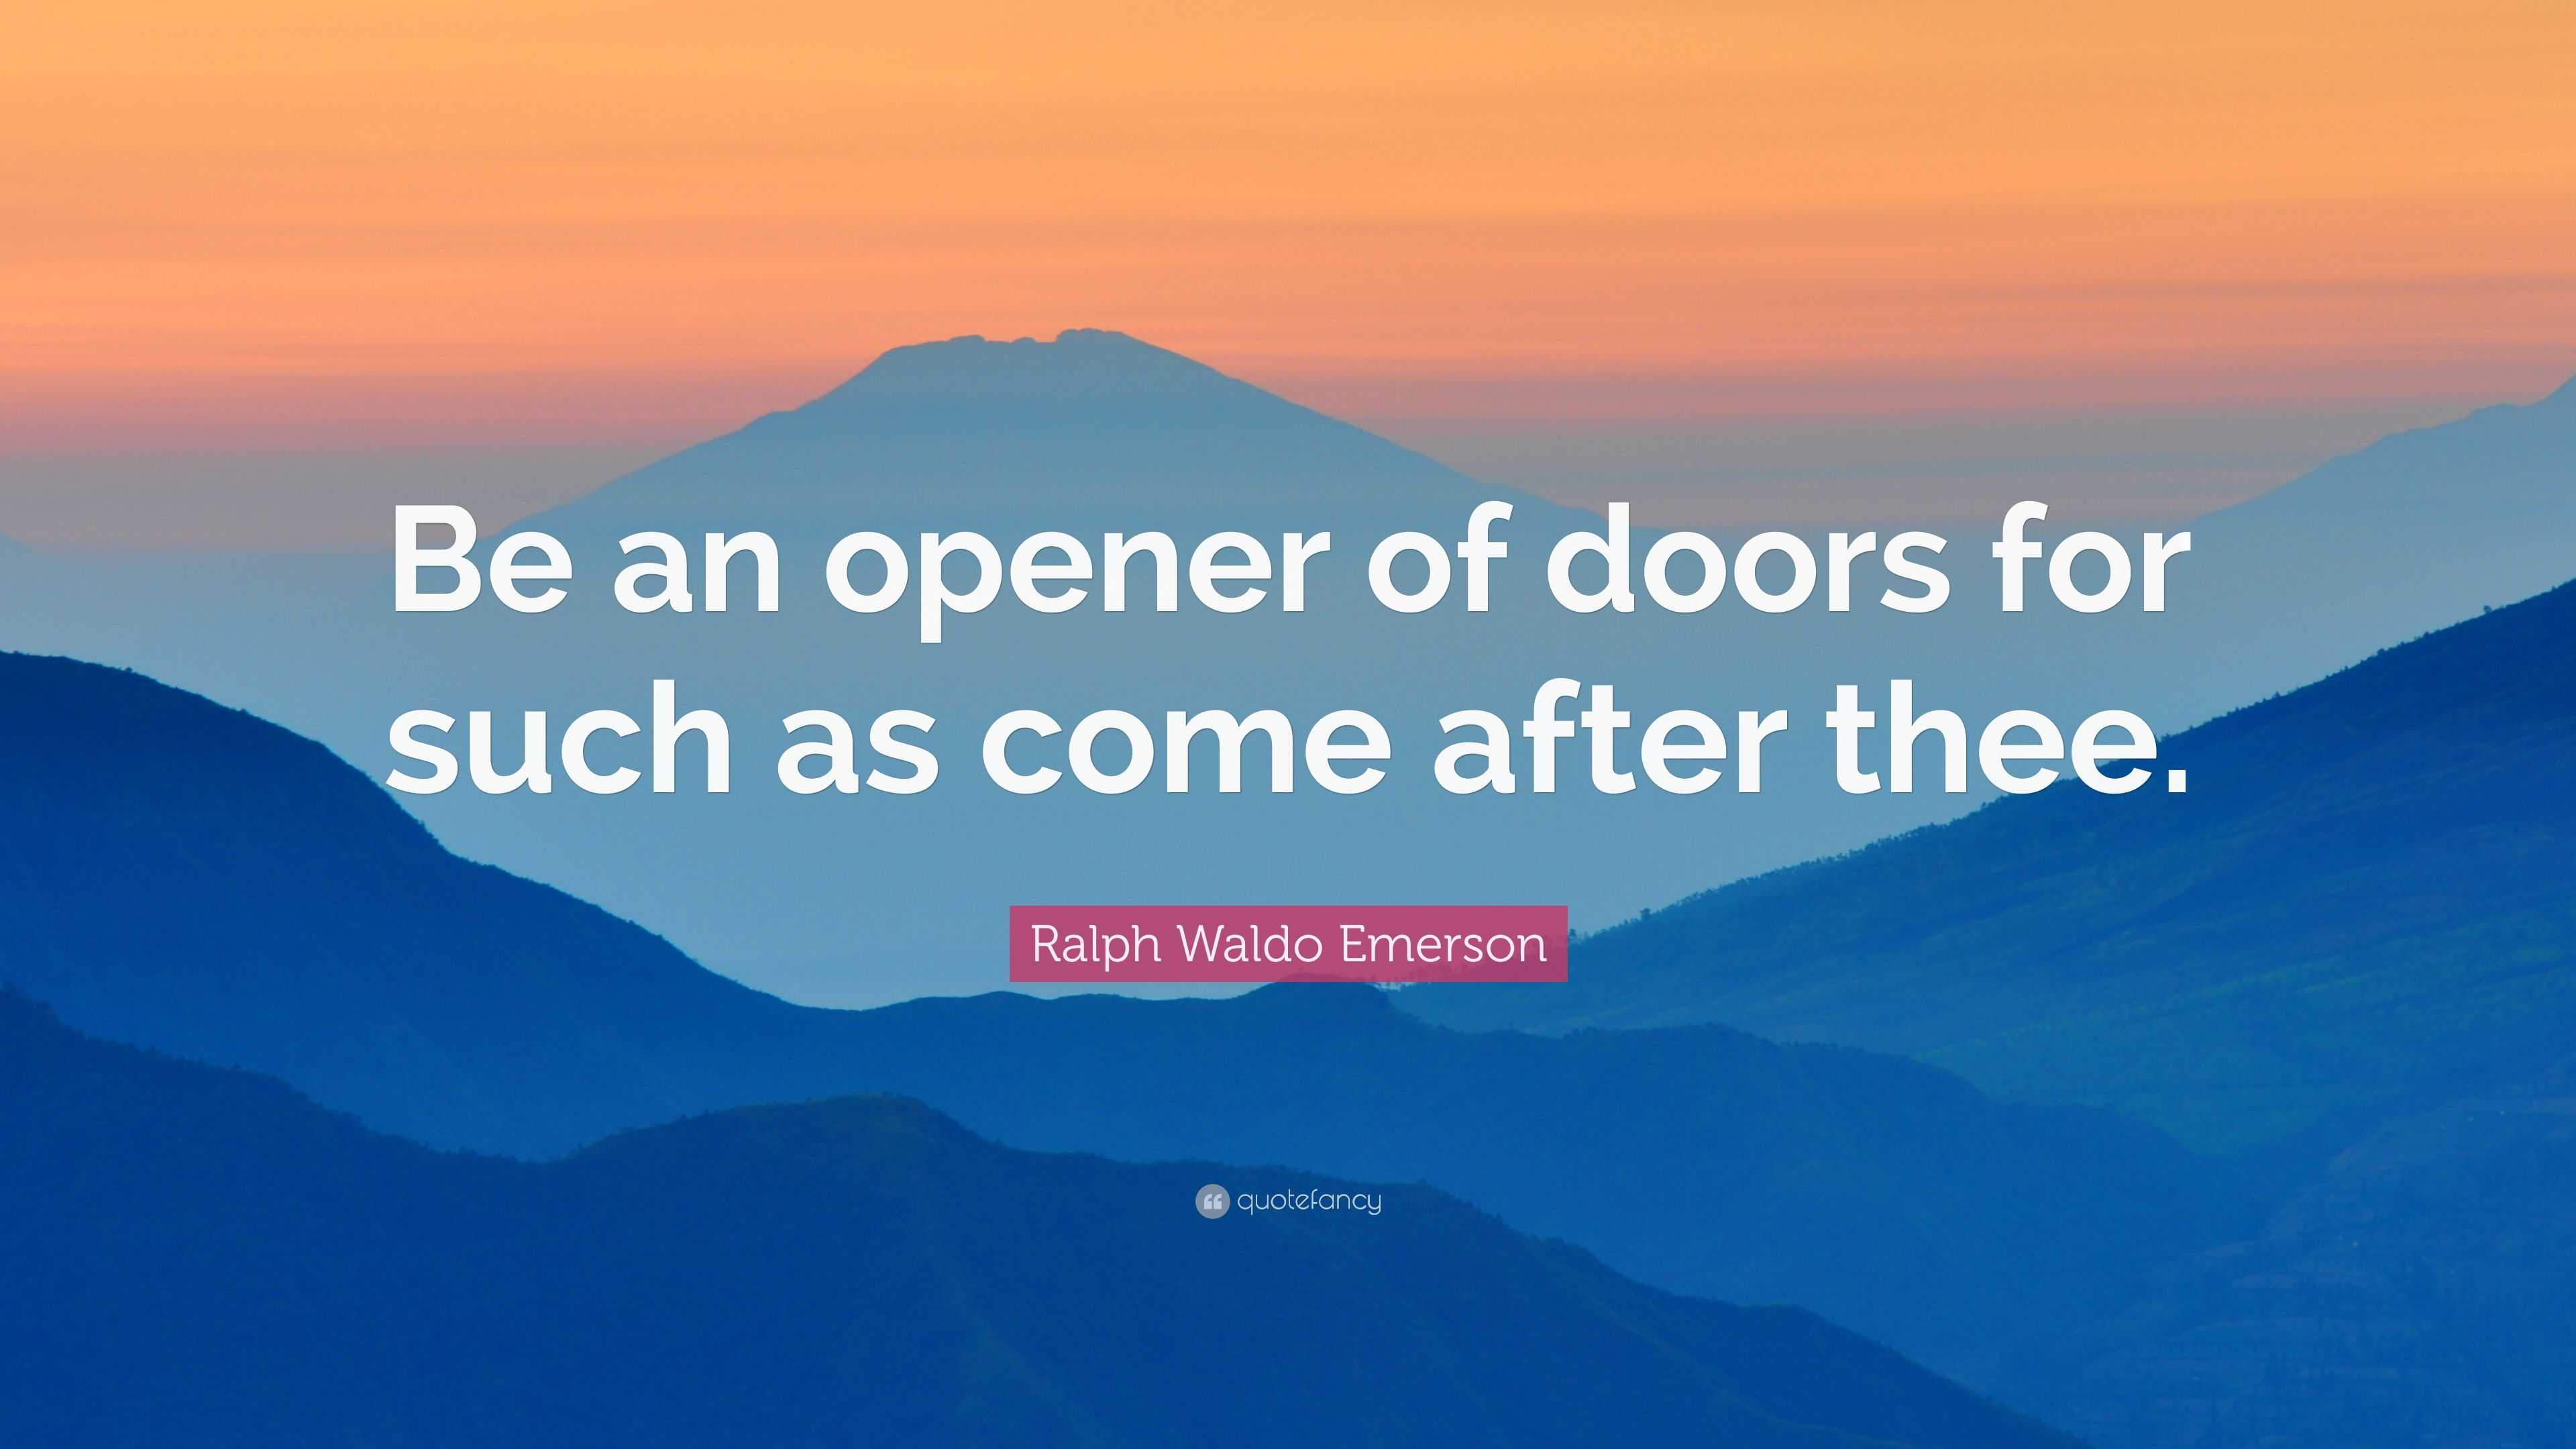 https://quotefancy.com/media/wallpaper/3840x2160/5353250-Ralph-Waldo-Emerson-Quote-Be-an-opener-of-doors-for-such-as-come.jpg